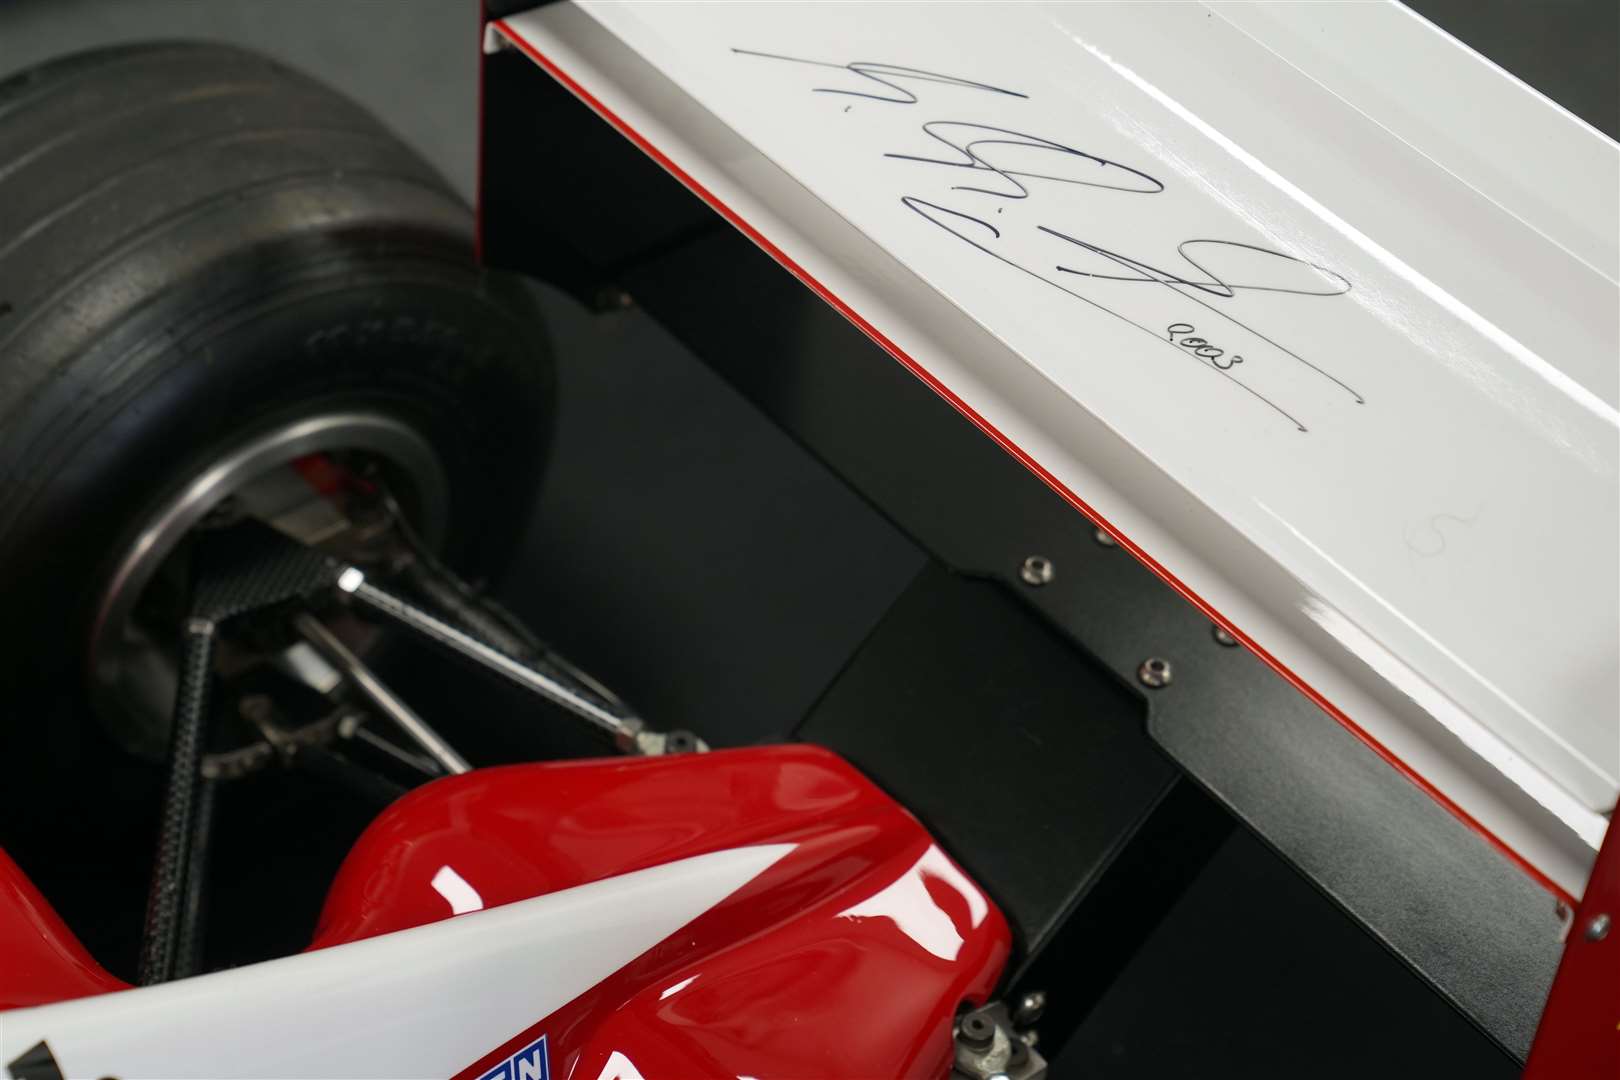 Michael Schumacher signed the rear spoiler of the remote-controlled car (Joe Giddens/PA)